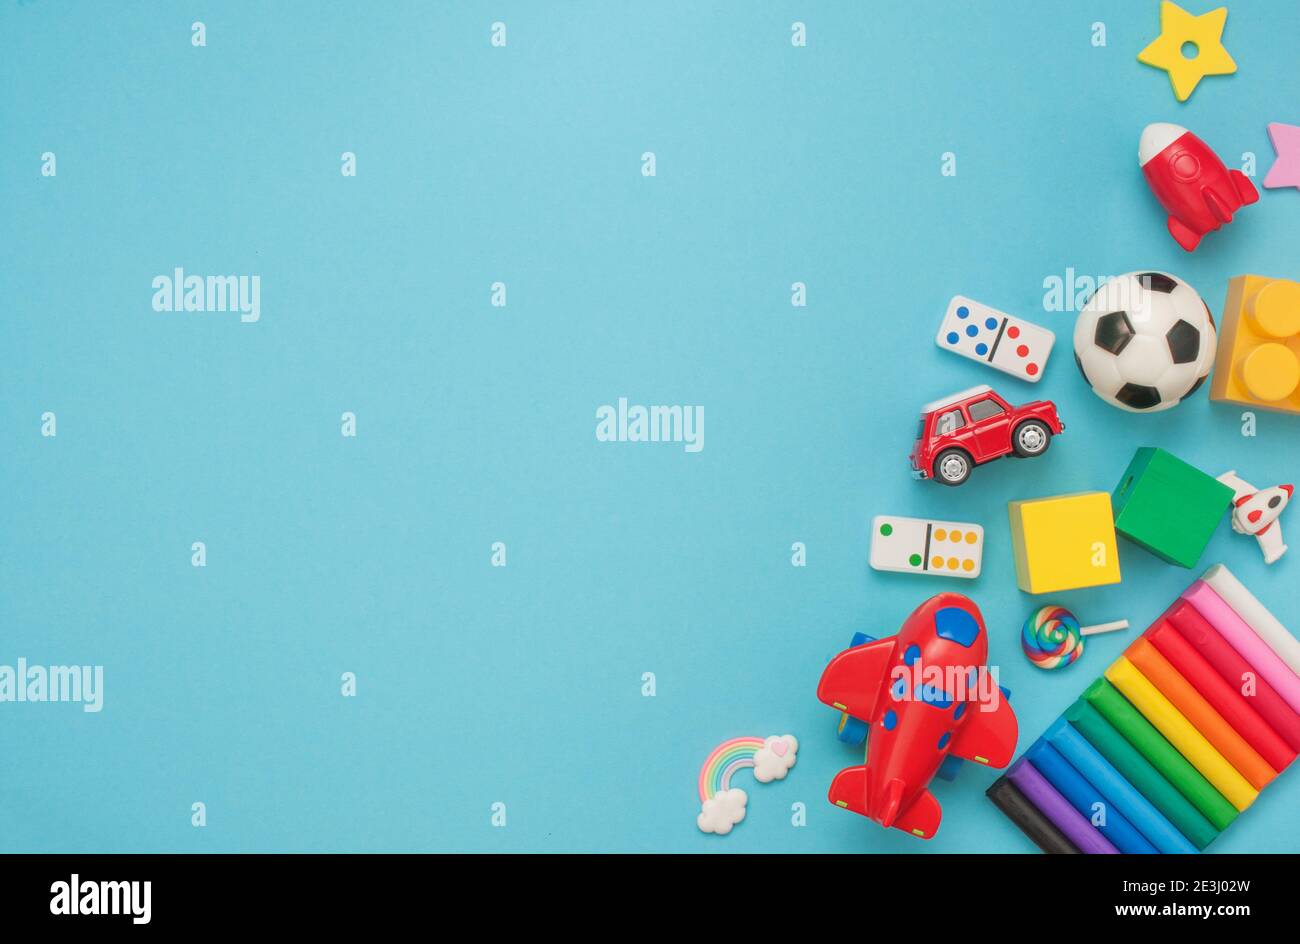 Frame of wooden and plastic kids toys on blue background with blank spce for text. Top view, flat lay. Stock Photo